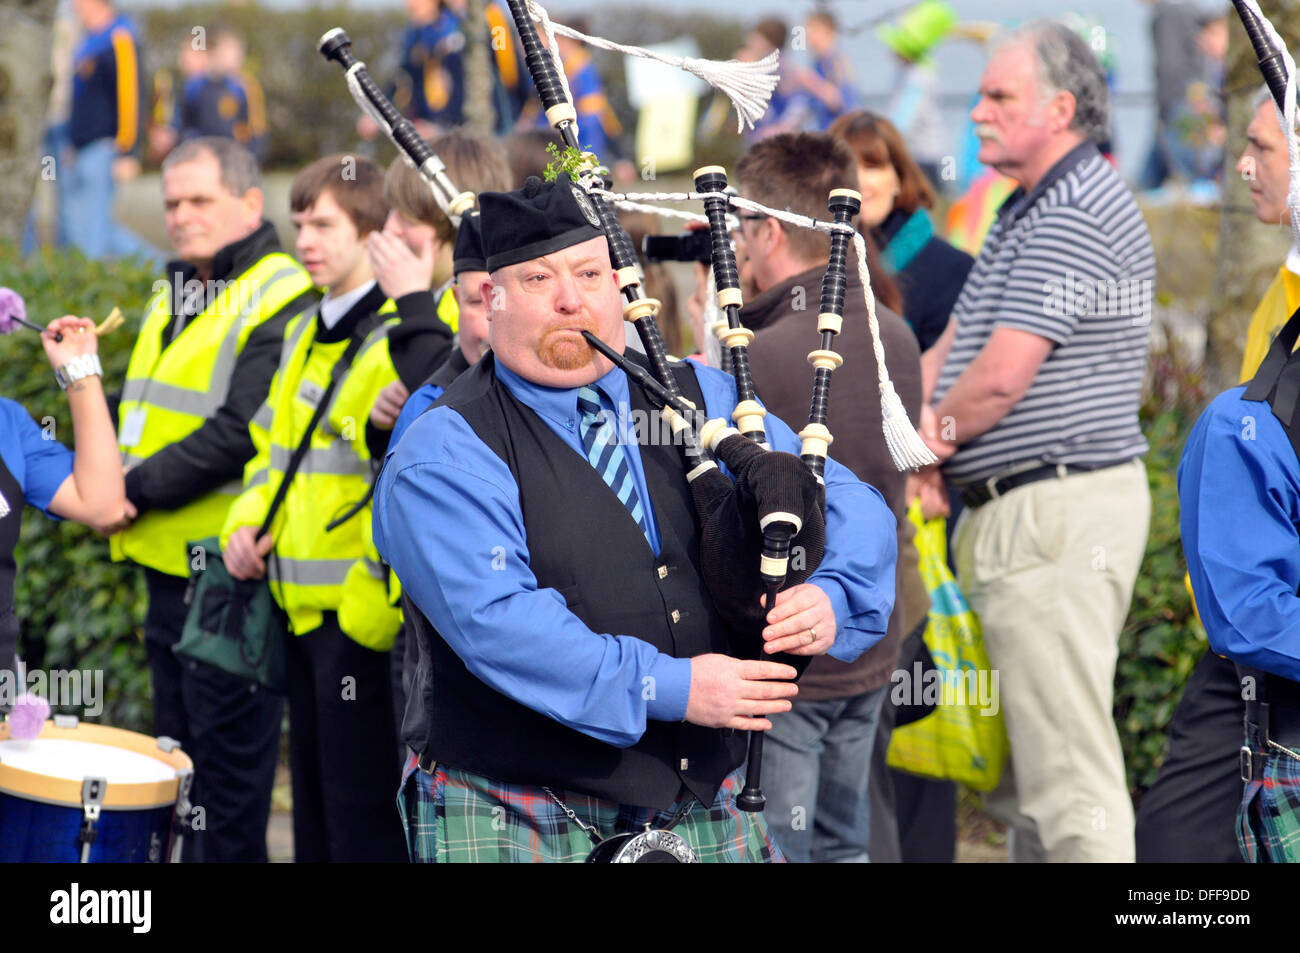 Man, in tartan, playing the bagpipes at Saint Patrick's Day parade in Derry, Londonderry, Northern Ireland. Stock Photo